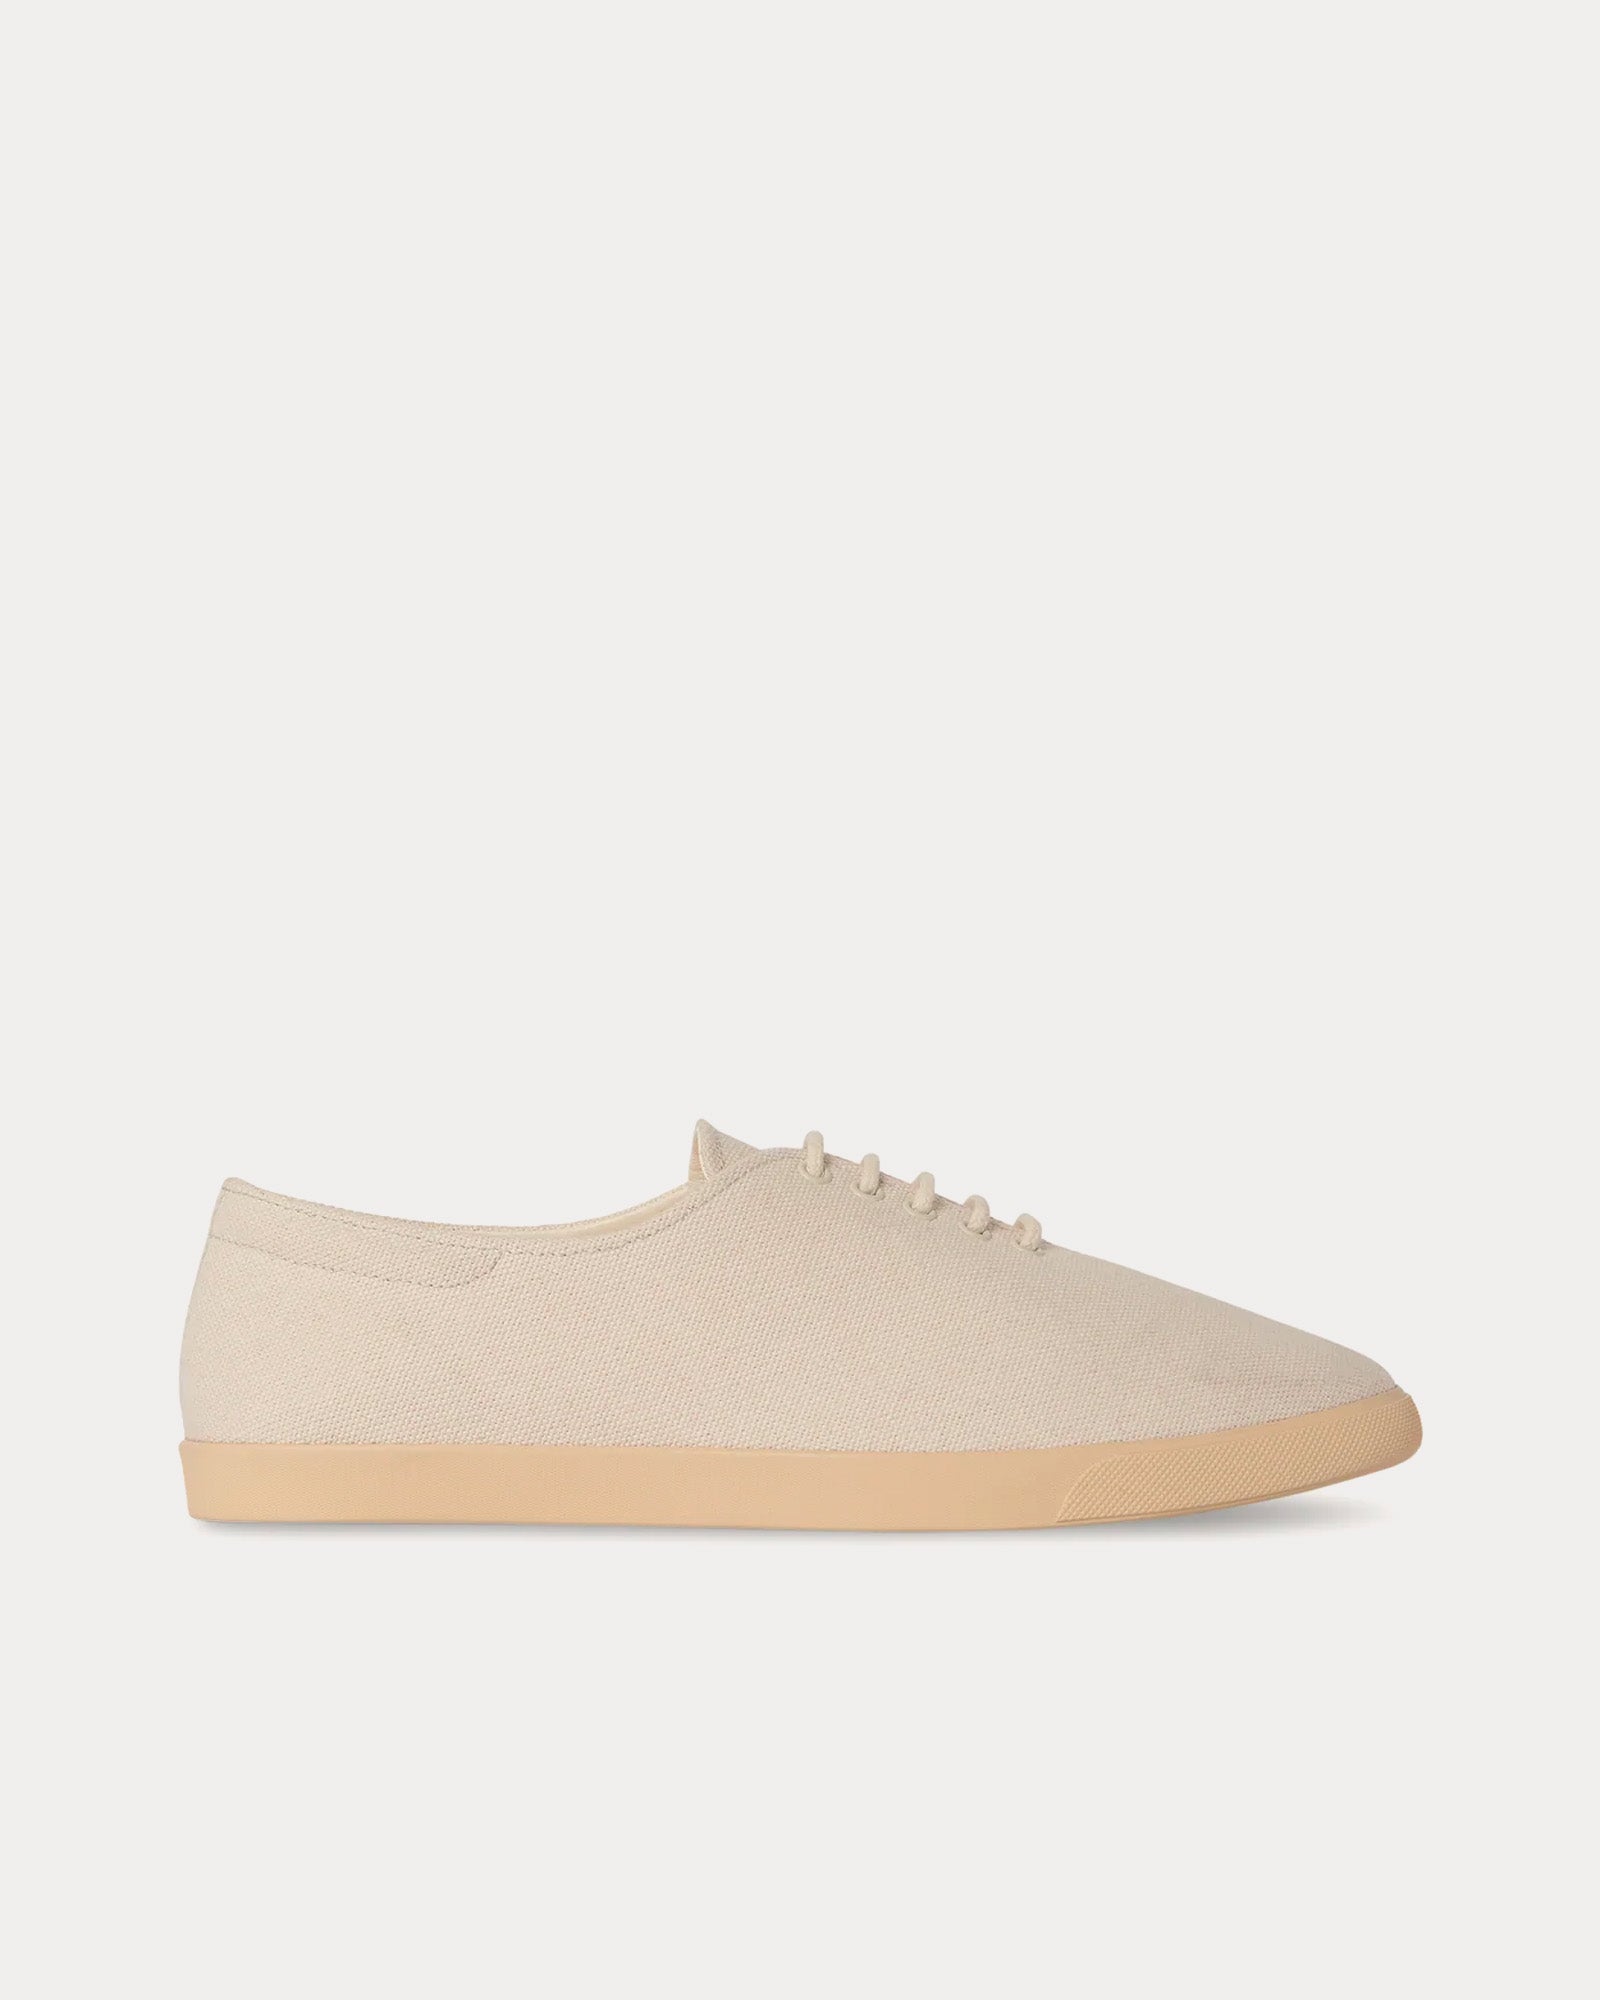 The Row - Sam Canvas Ivory / Panna Low Top Sneakers